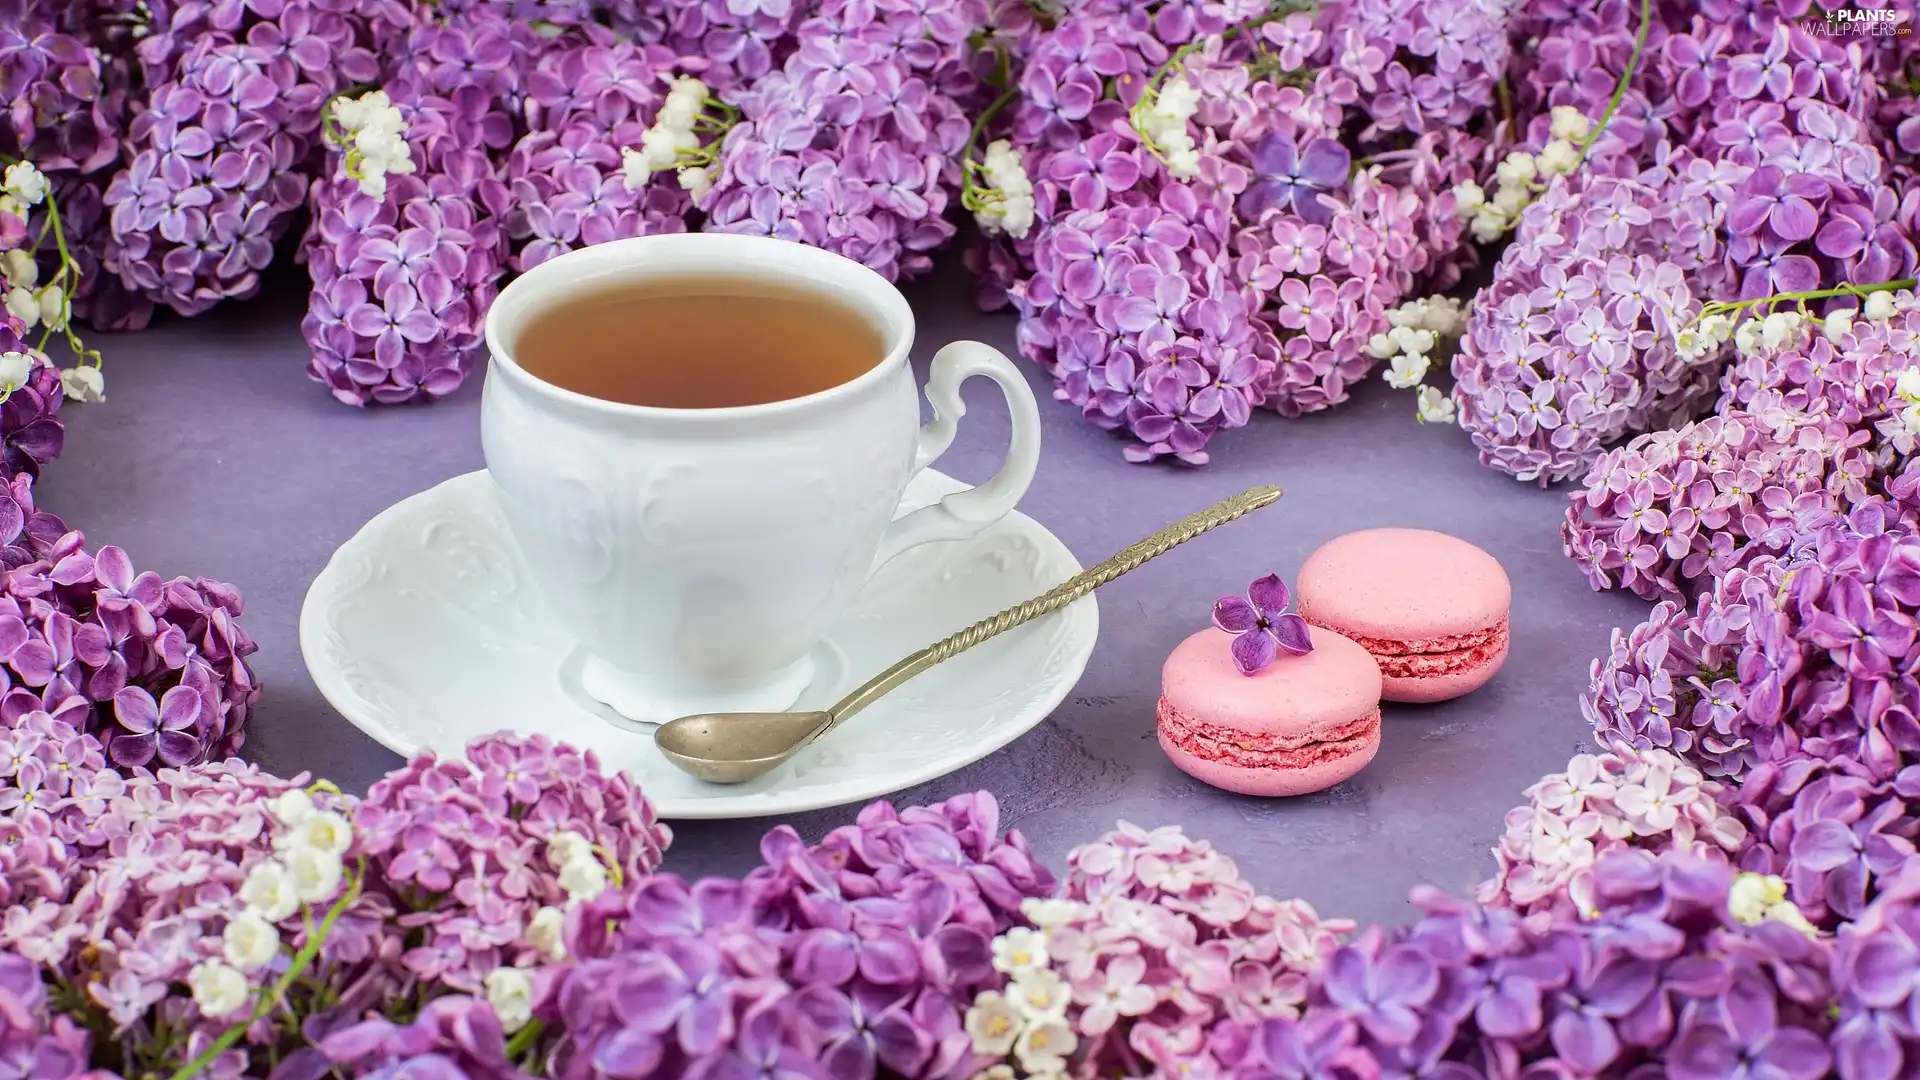 saucer, teaspoon, Twigs, Cookies, without, tea, cup, Macaroons